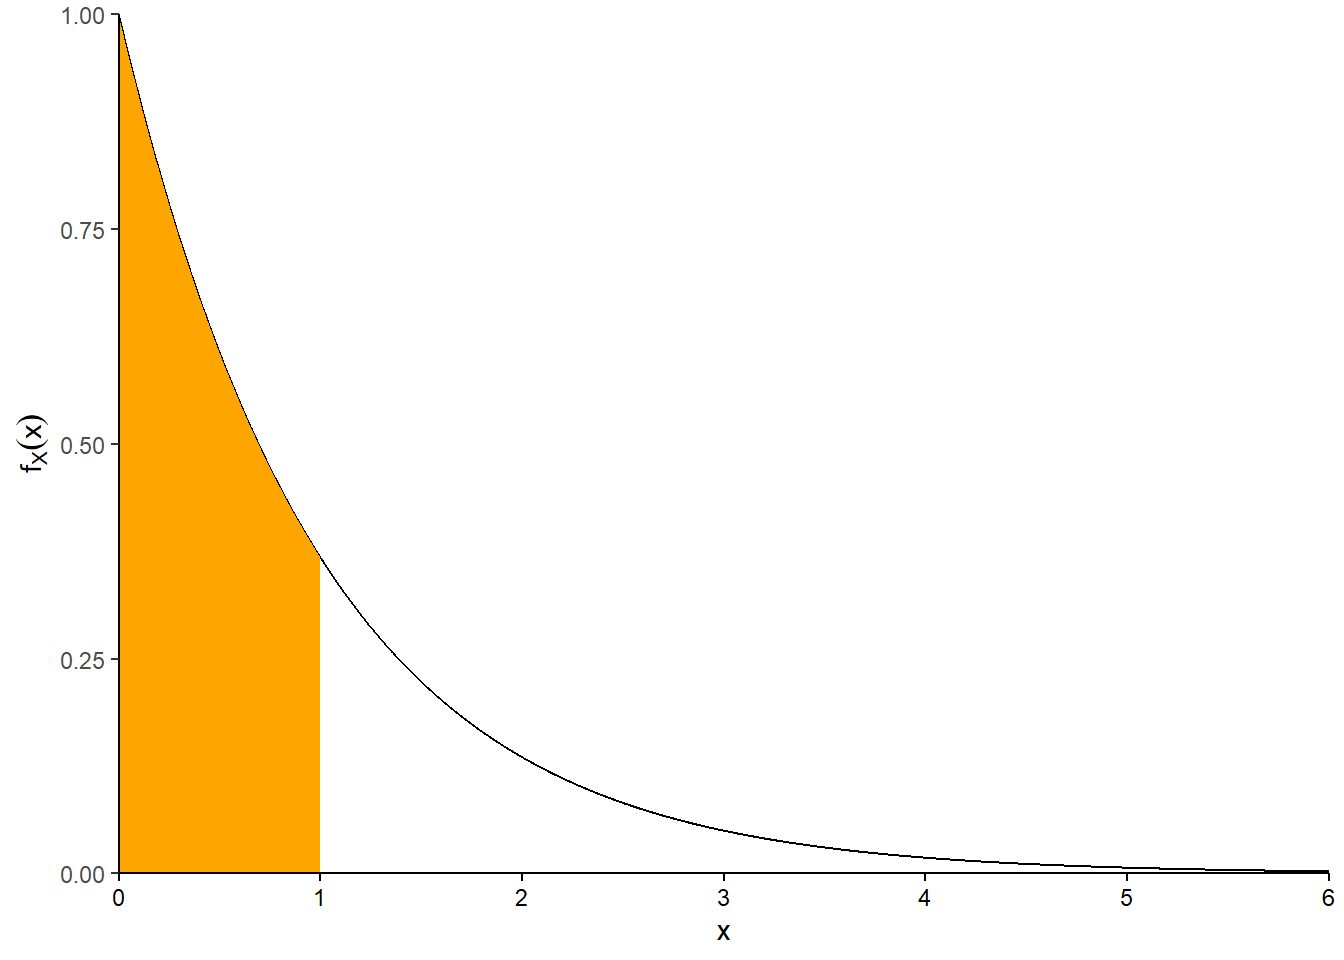 Illustration of the pdf (left) and the cdf (right) for the Exponential(1) distribution represented by the spinner in Figure 4.13. The shaded area in the plot on the left represents \(F_X(1)=\textrm{P}(X\le 1)\), which is \(1-e^{-1}\approx0.632\). This area is represented by the \((1, F_X(1))\) point in the cdf plot on the right, and in the region from 0 to 1 in the spinner in Figure 4.13.